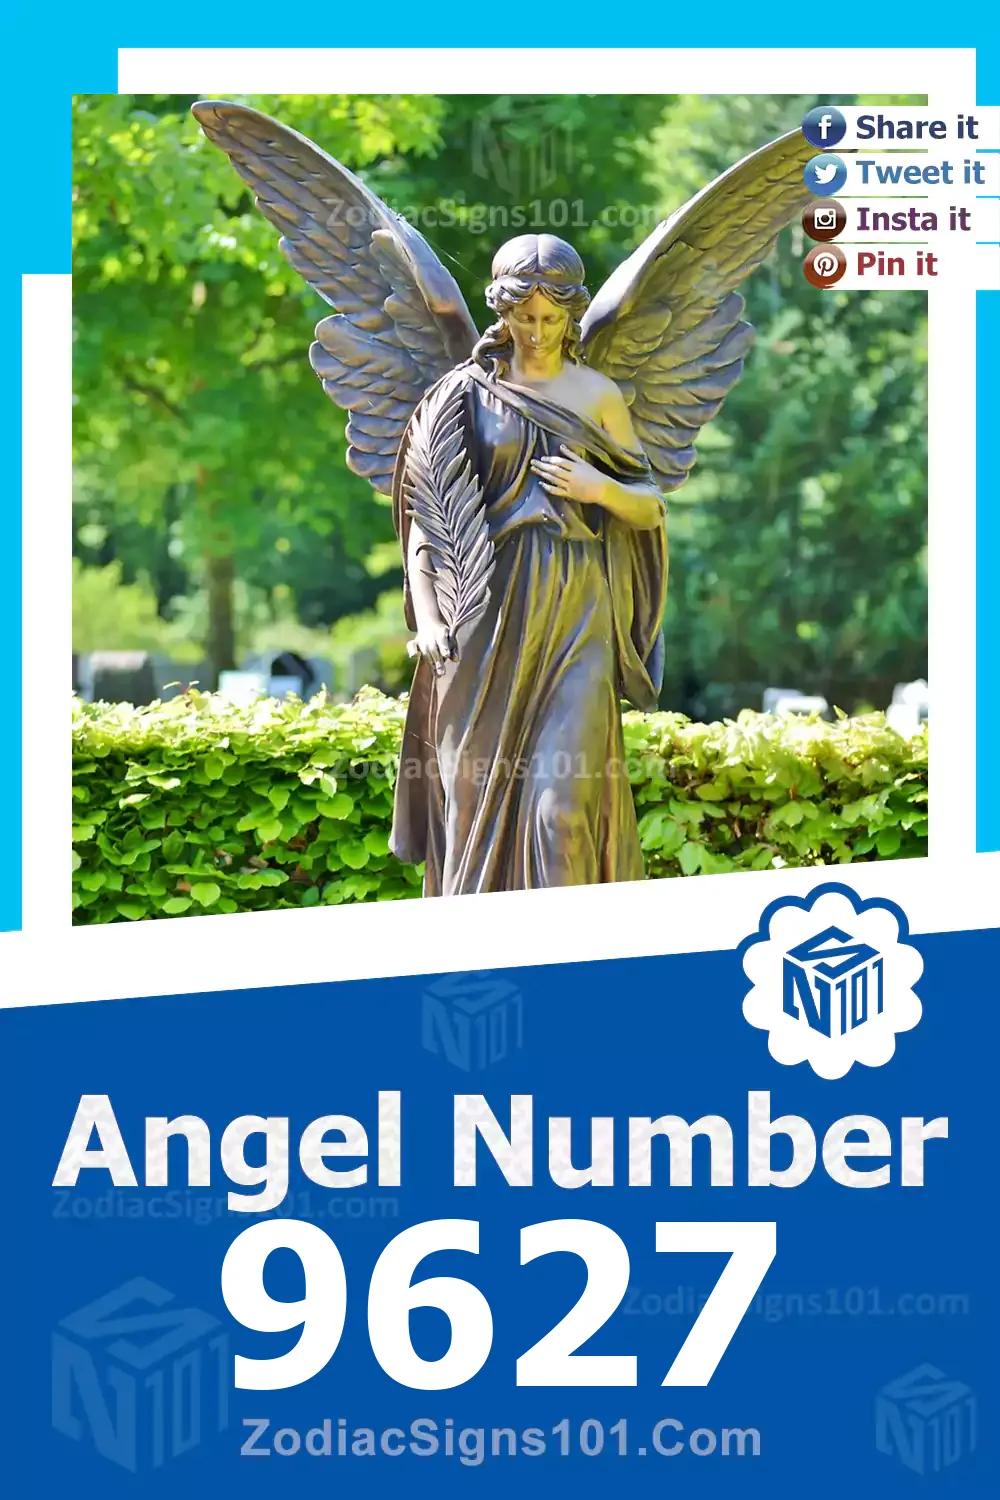 9627 Angel Number Meaning